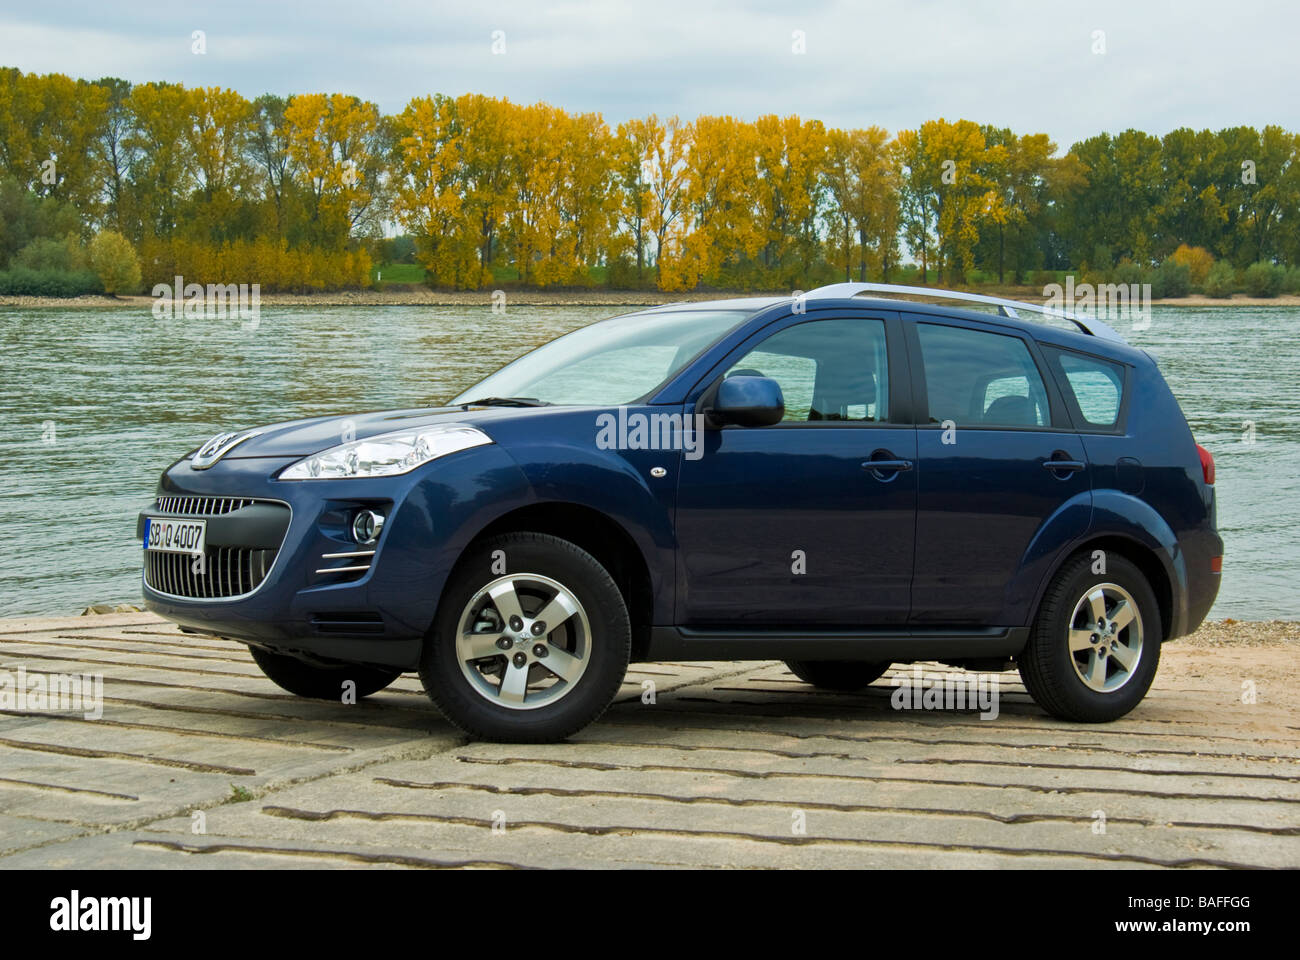 Blue Peugeot 4007 SUV at Rhine river side view Stock Photo